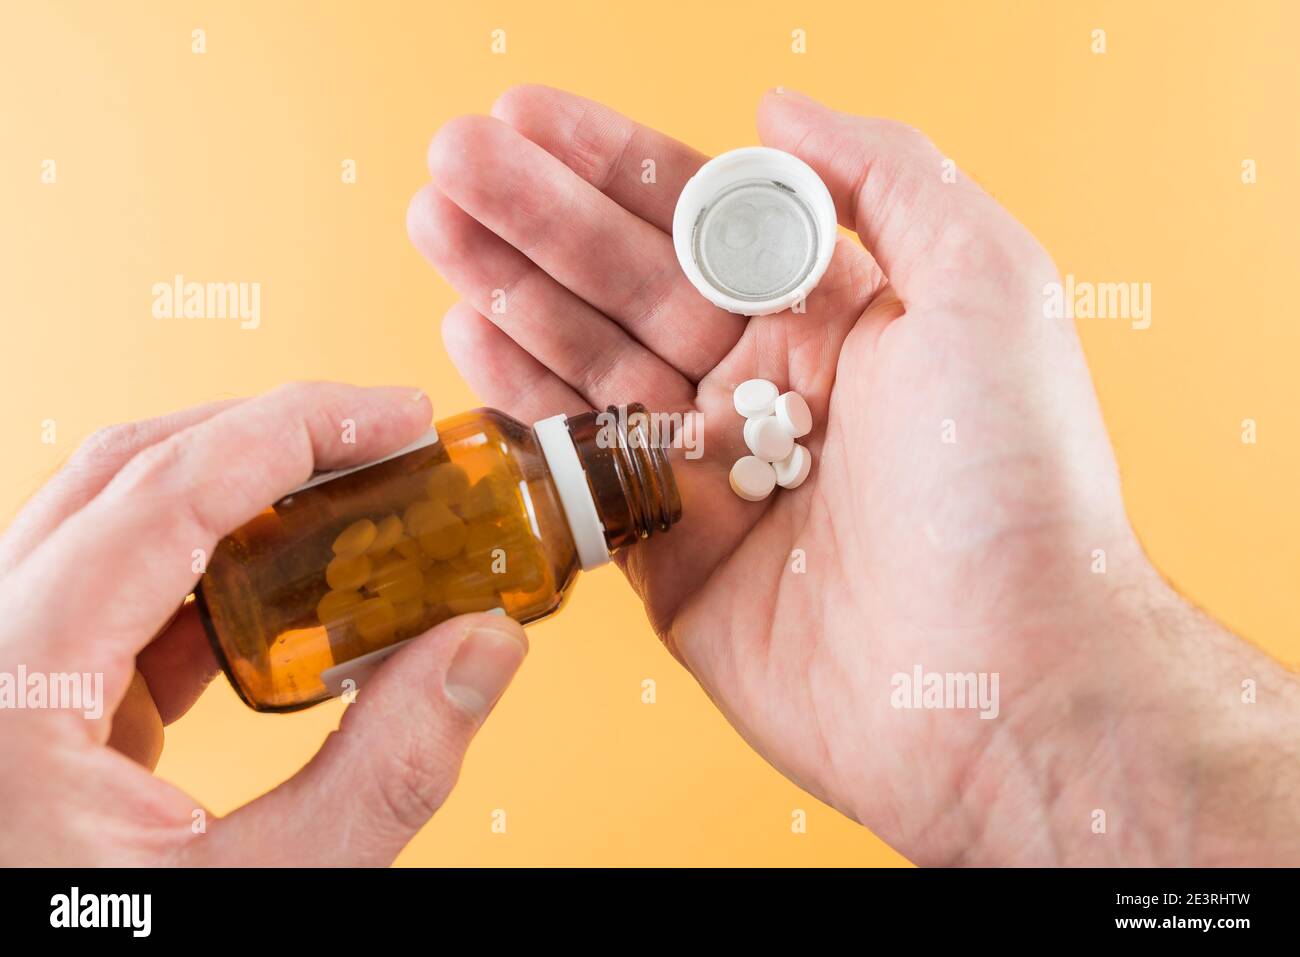 close-up of hands dispensing tablets from pill bottle, medication concept Stock Photo